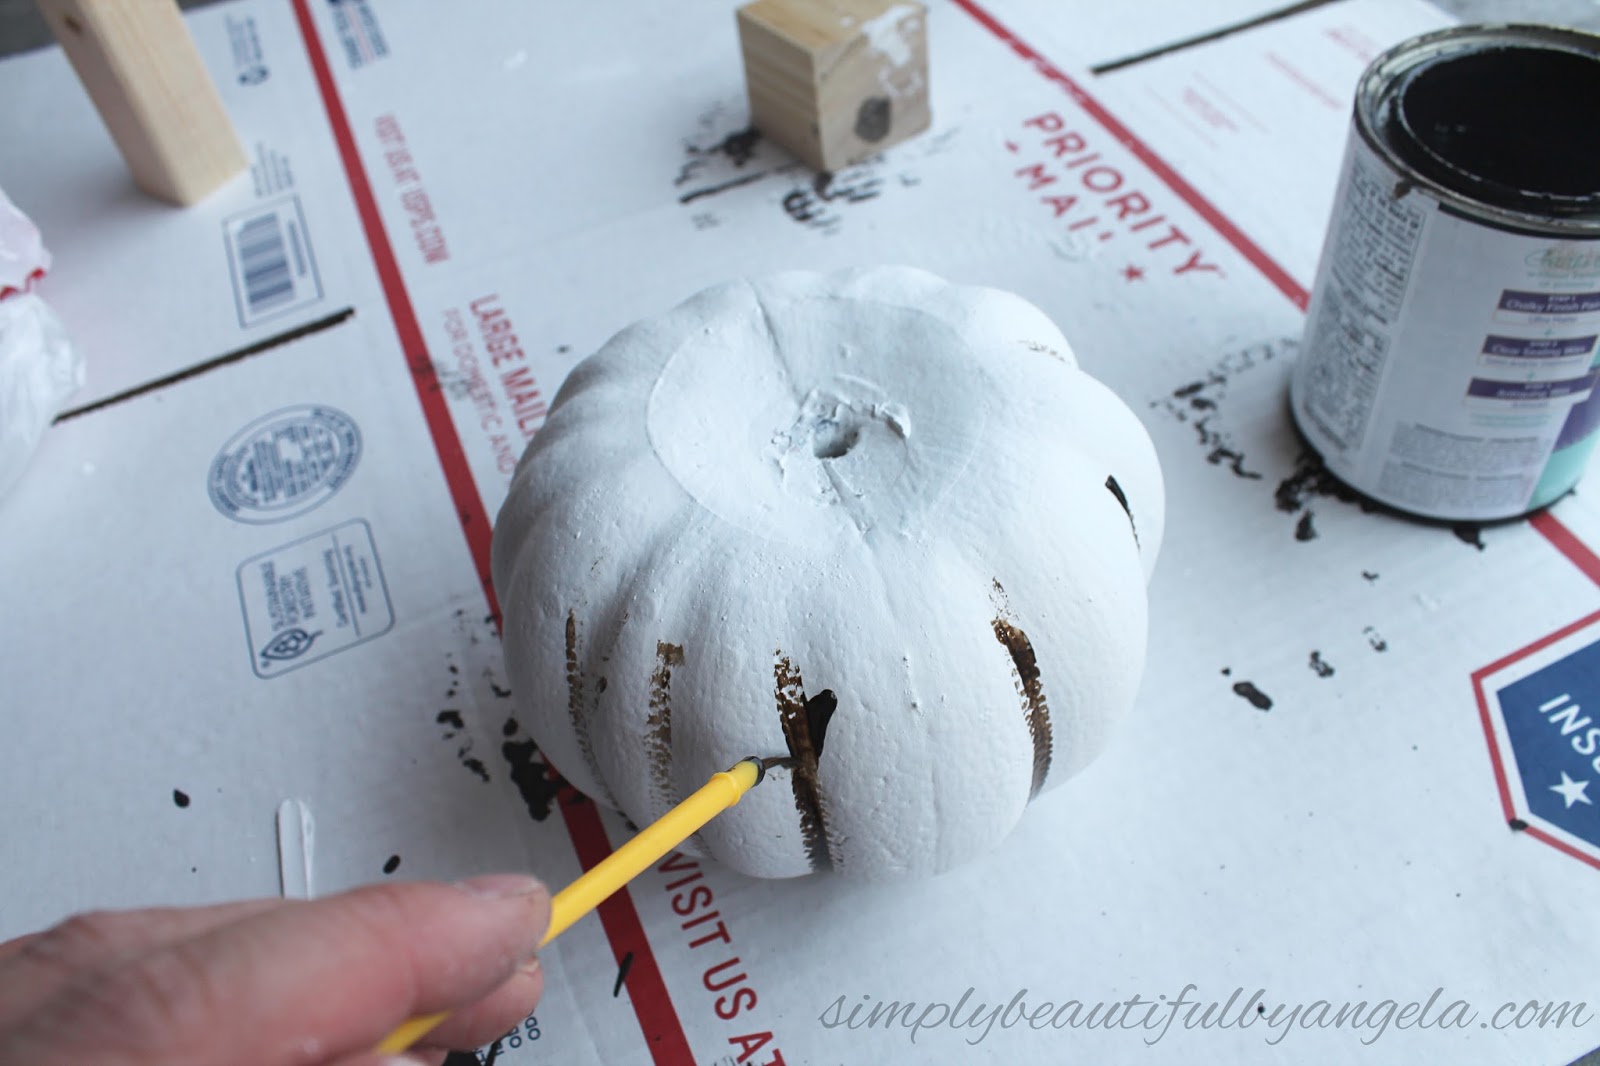 Dollar Store Pumpkins with White Wax and Rub N Buff - DIY Beautify -  Creating Beauty at Home